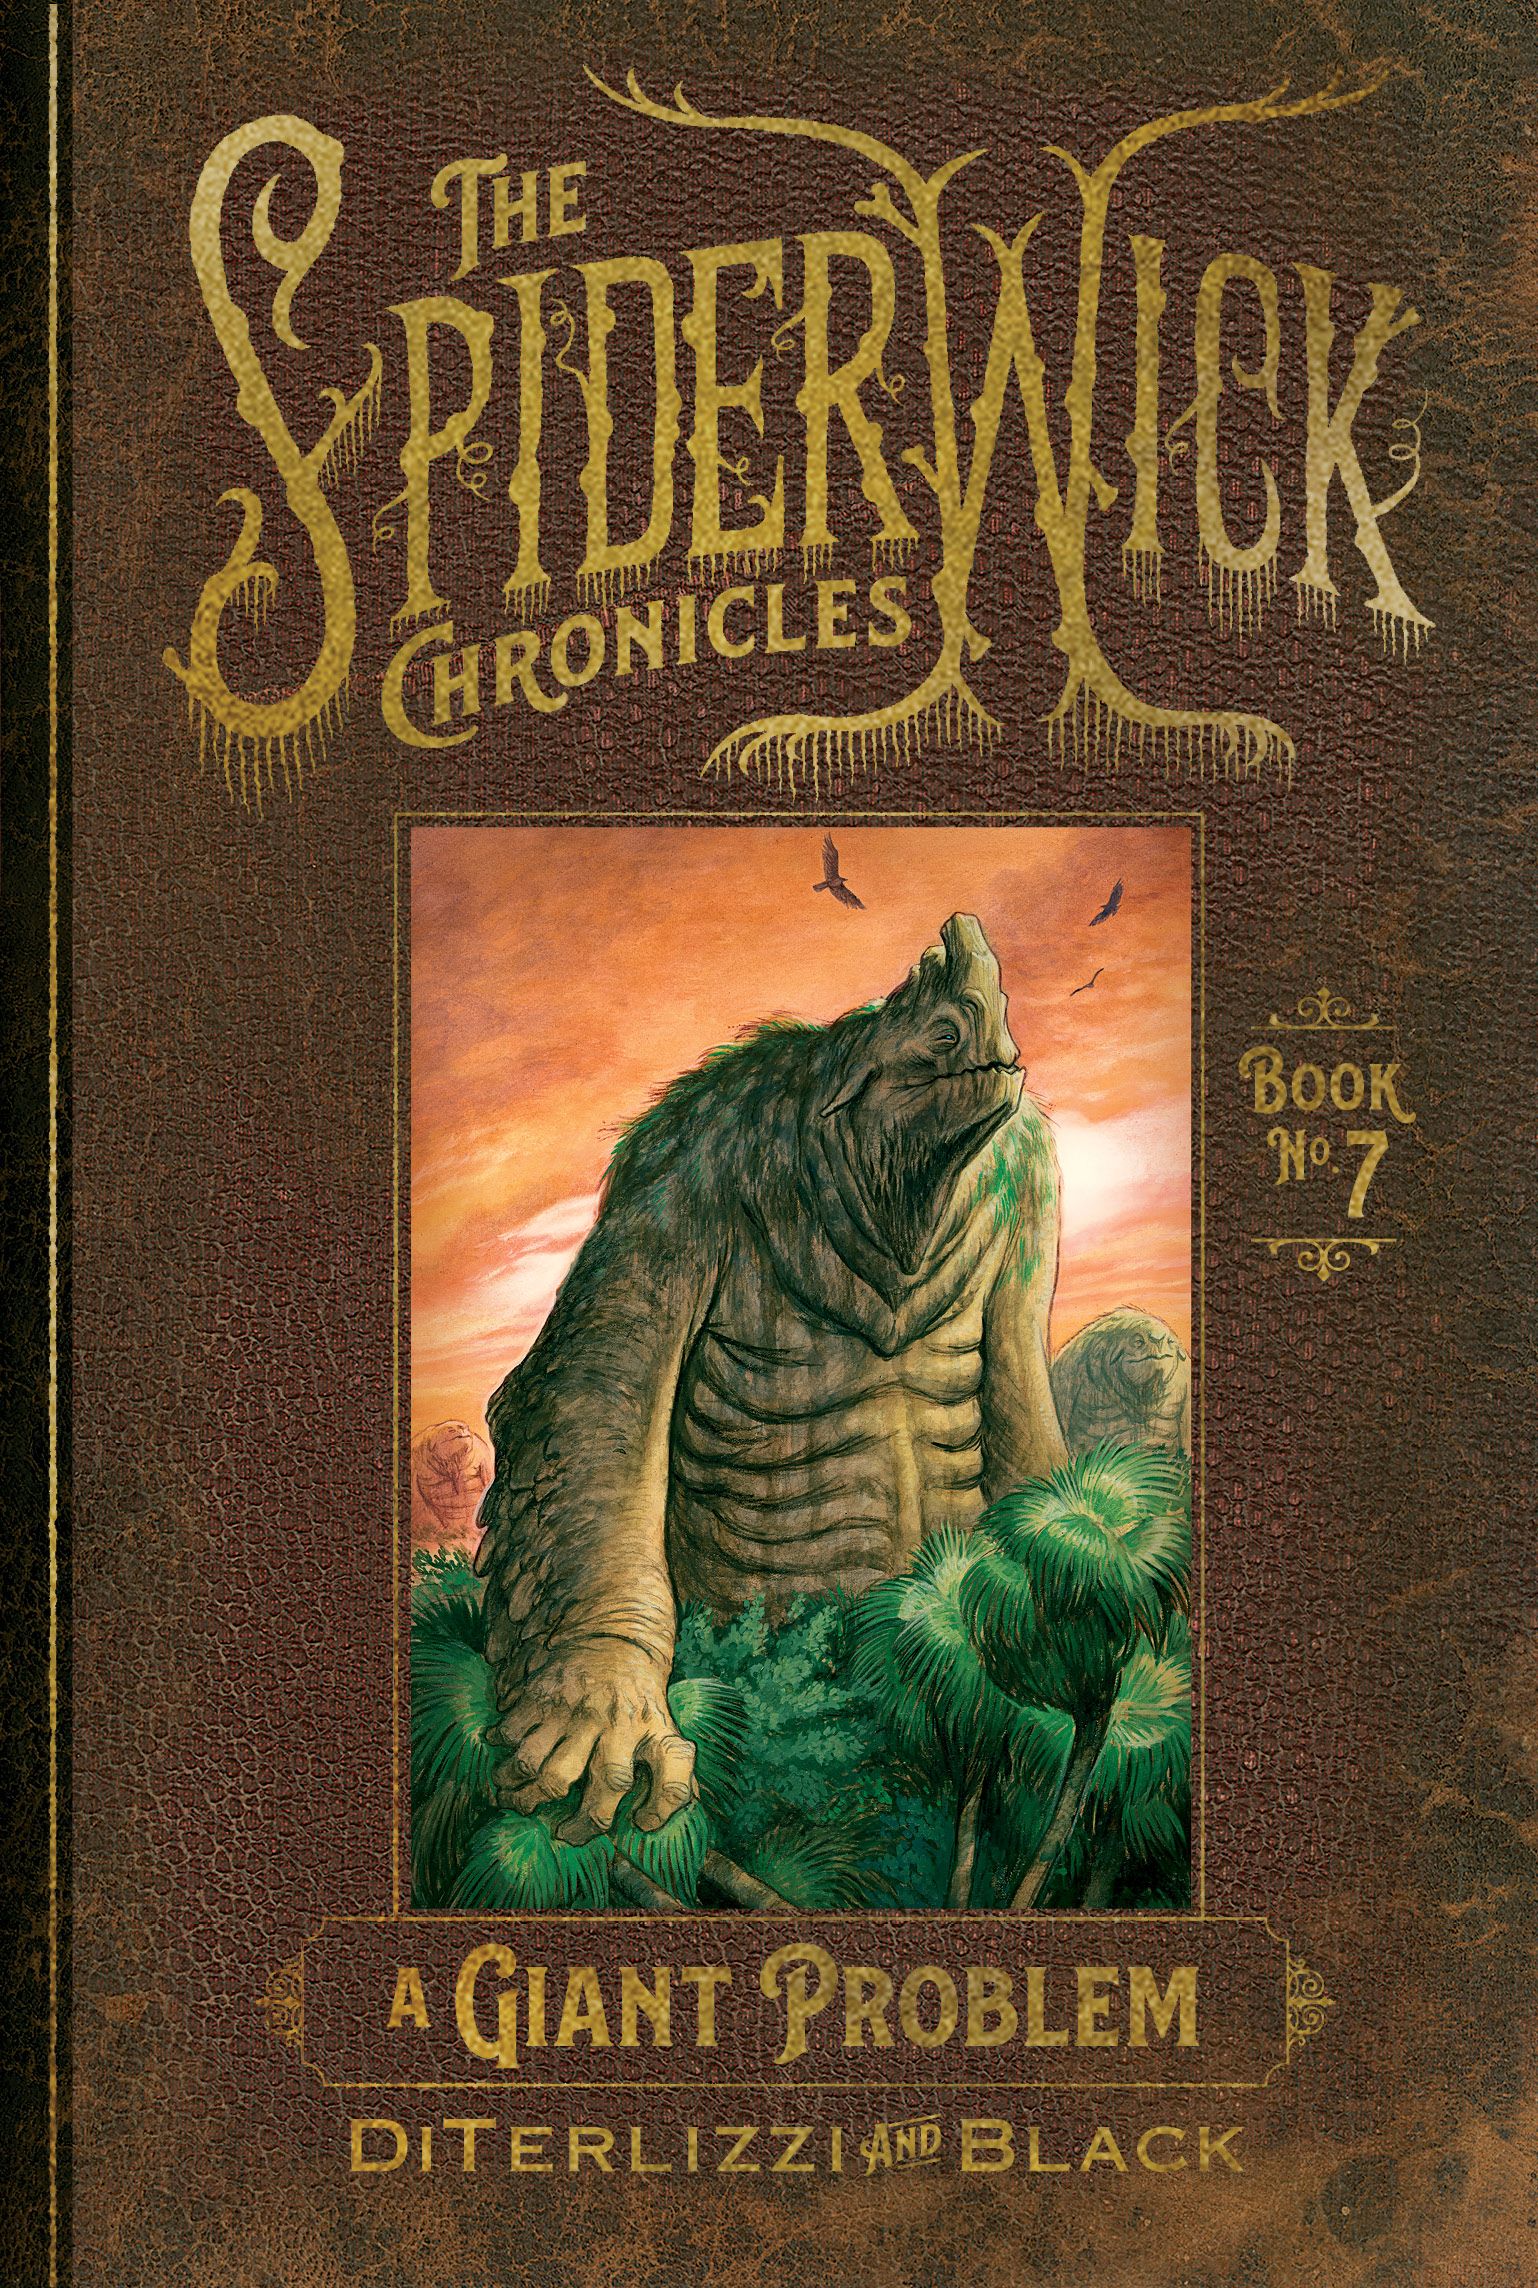 The Spiderwick Chronicles Return To Shelves With New Covers [EXCLUSIVE]